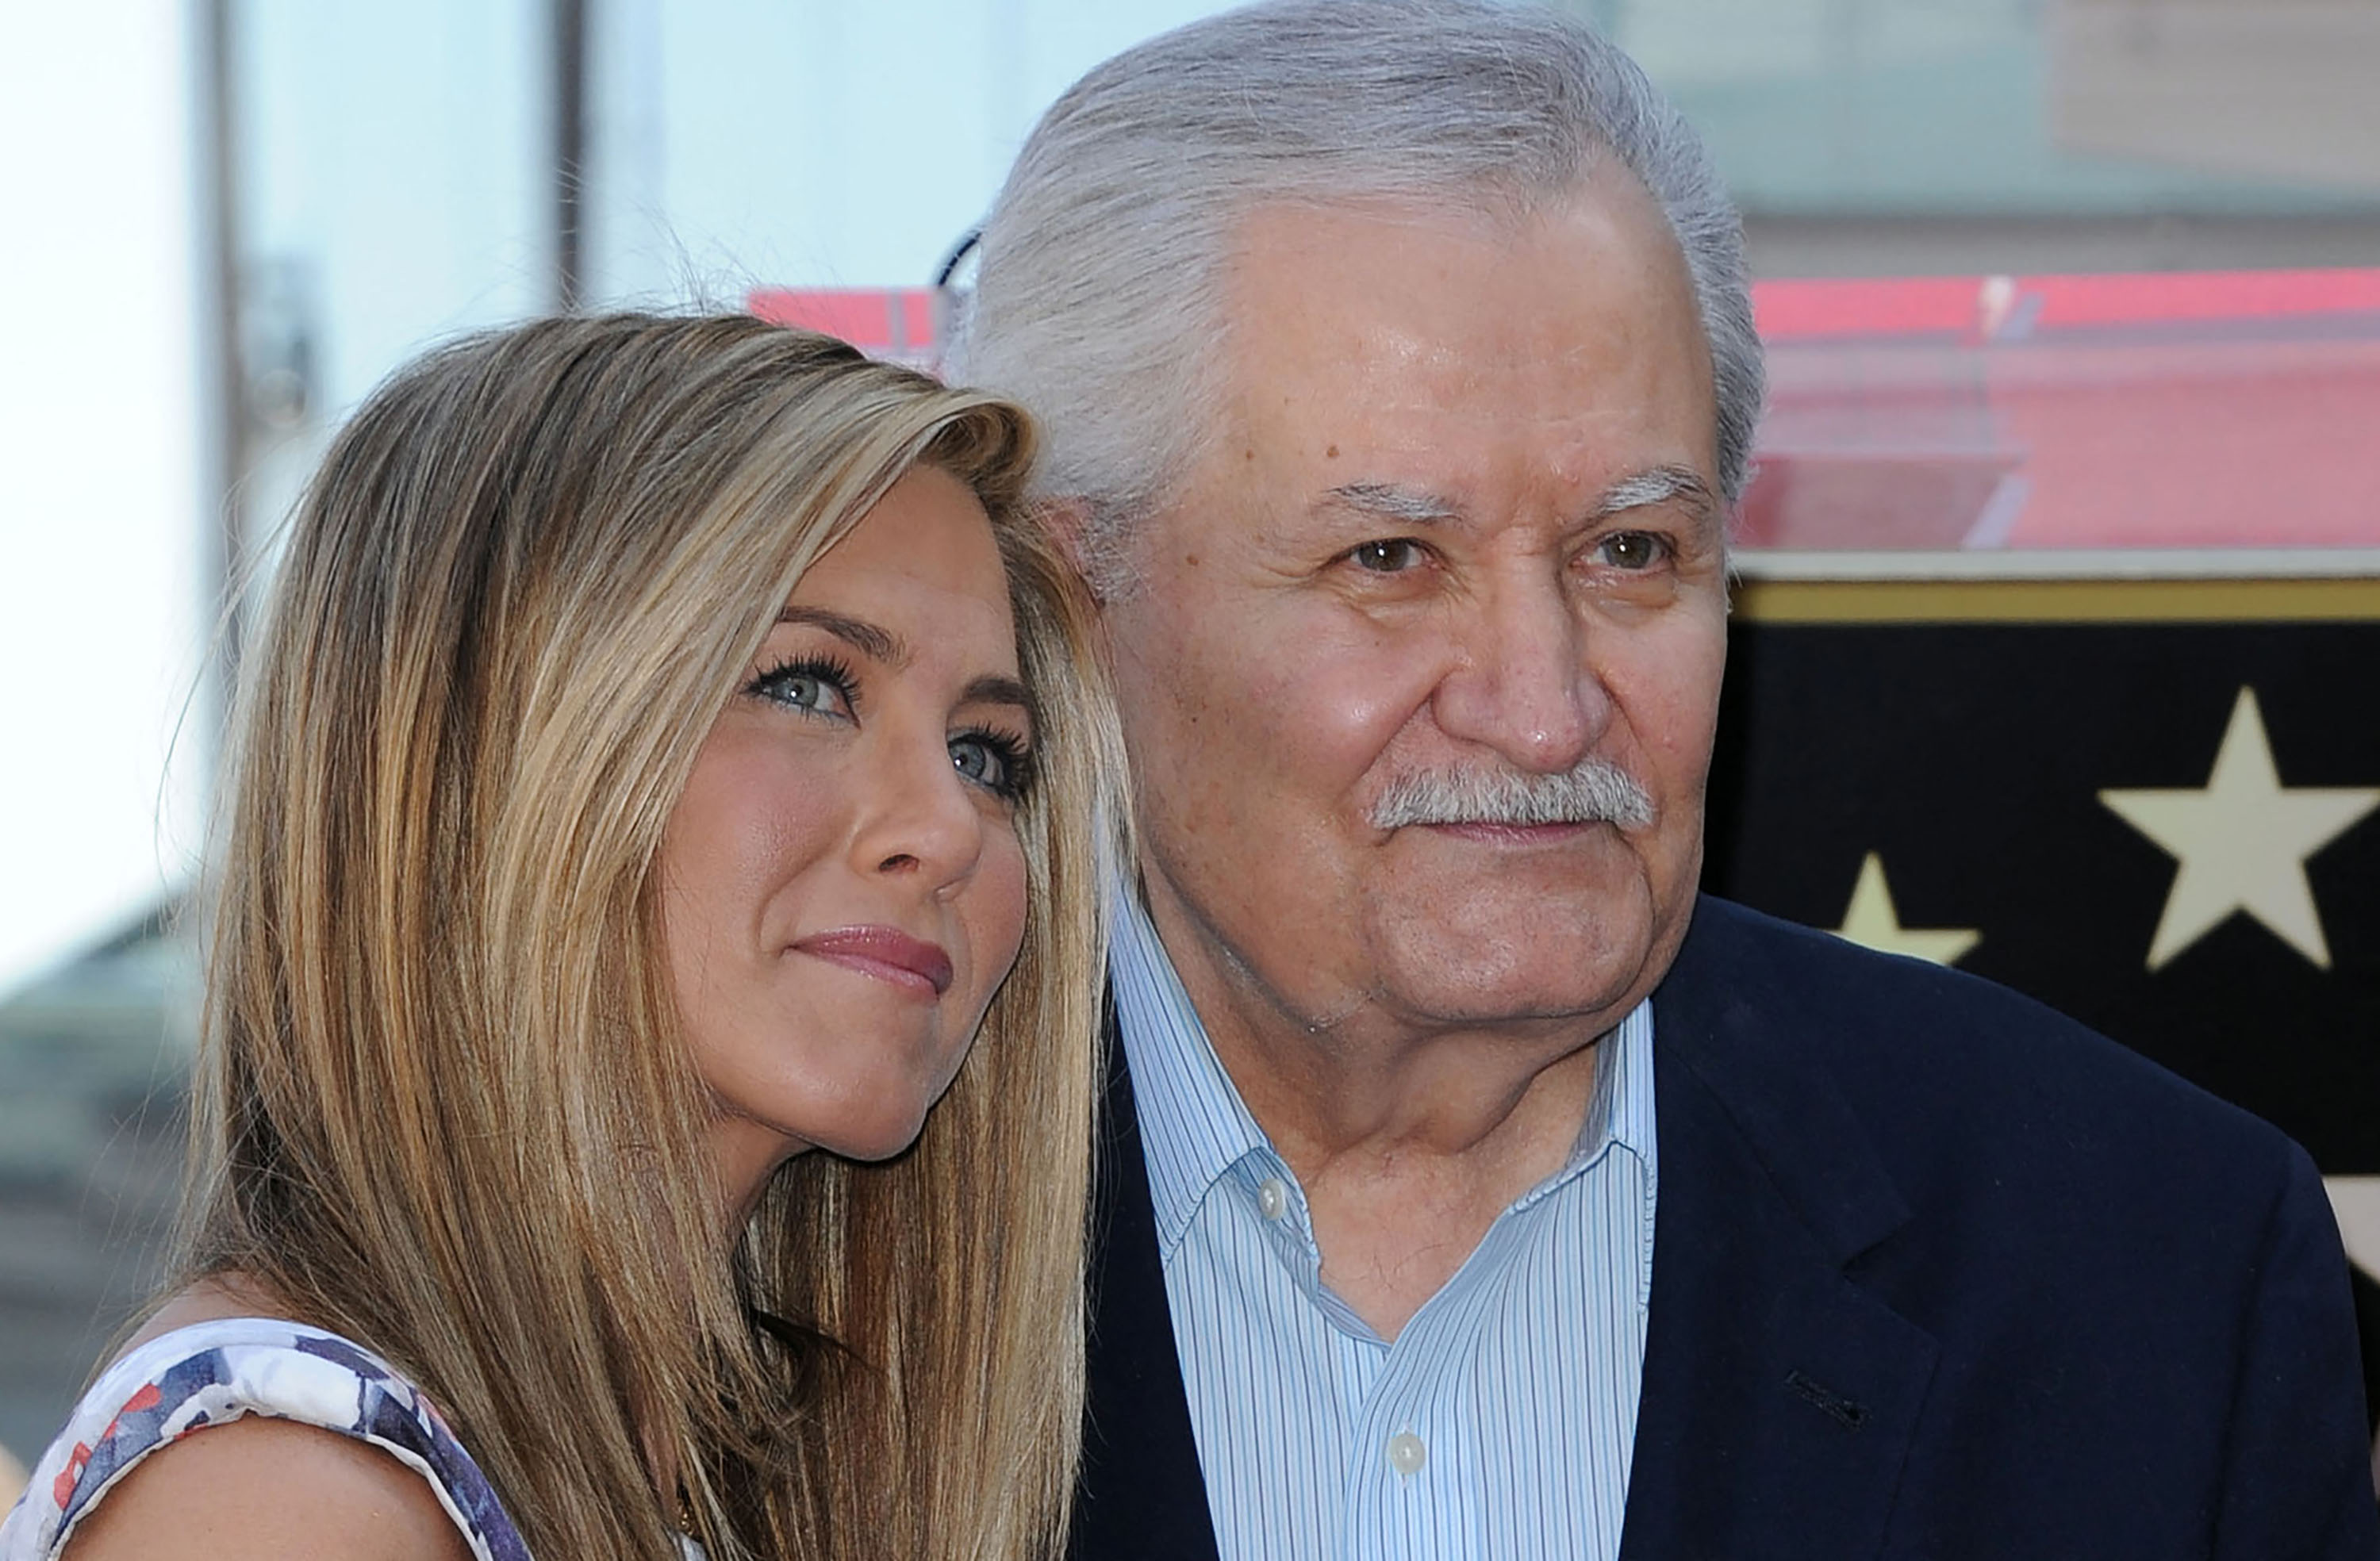 Actor John Aniston with his daughter, actress Jennifer Aniston, in 2012.